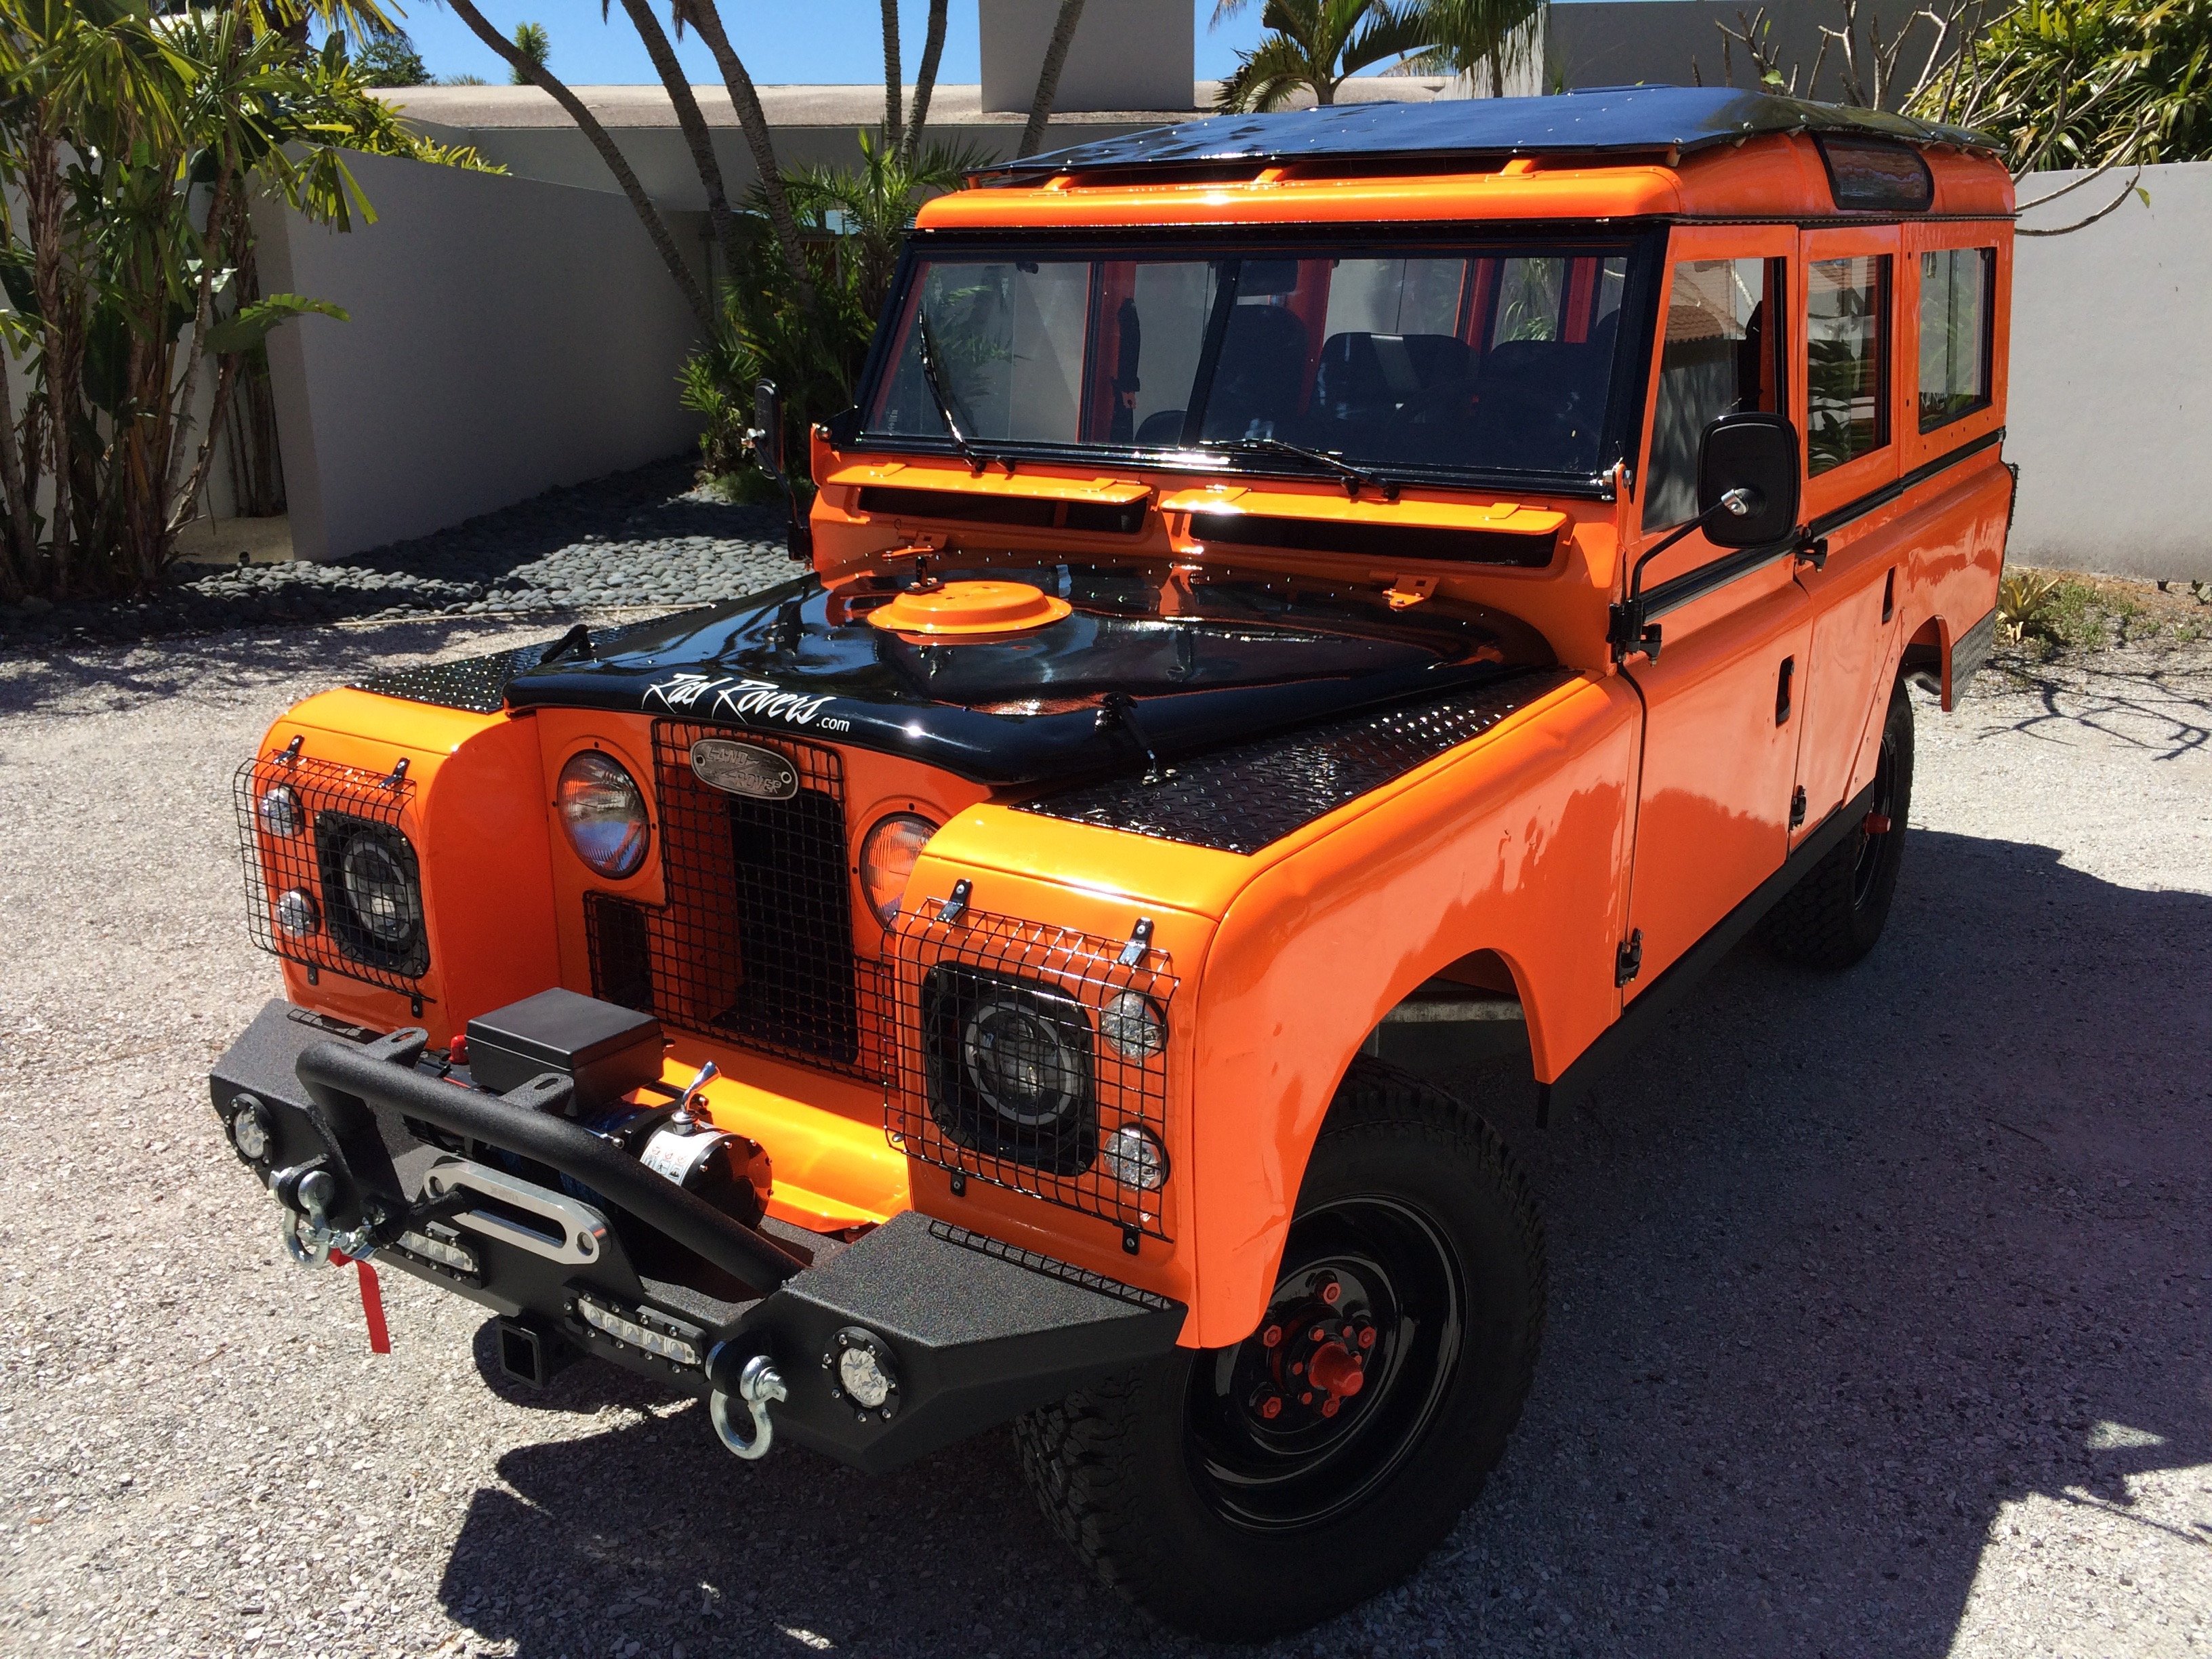 1970 Land Rover 109 series 2a 5 door station wagon SOLD!